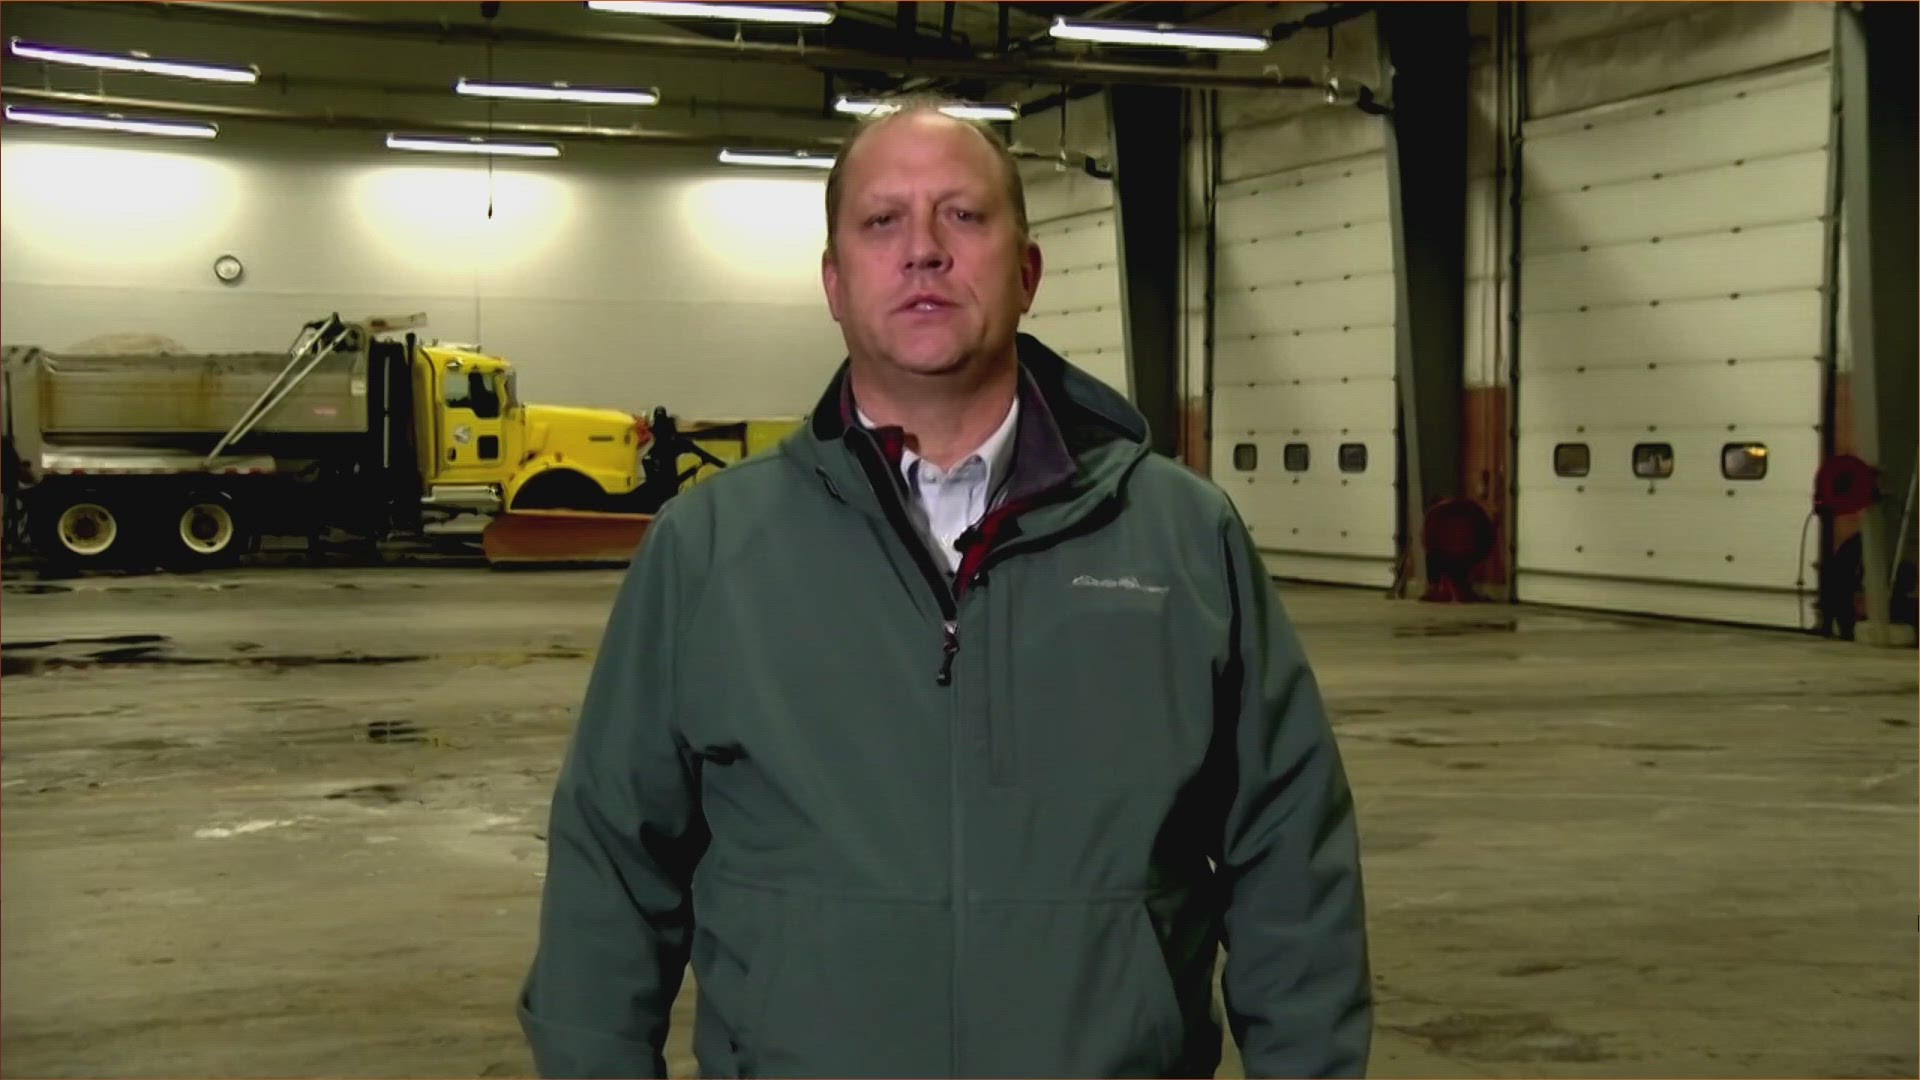 With schools closed and plows out, safety is in mind for this Public Facilities Director.